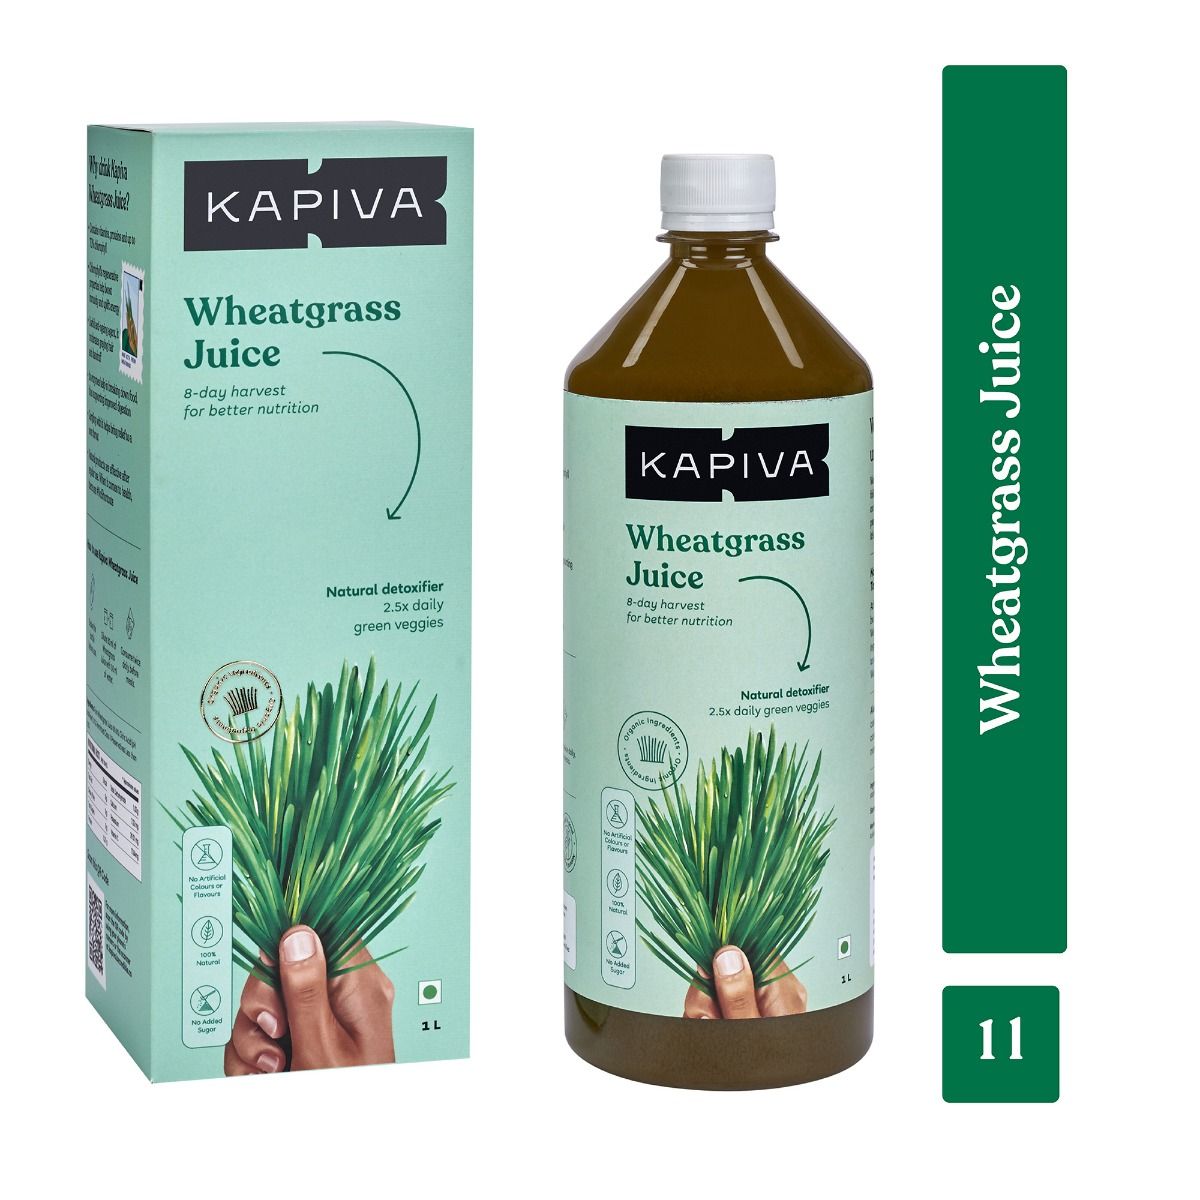 Kapiva Wheatgrass Juice, 1 L Price, Uses, Side Effects, Composition -  Apollo Pharmacy